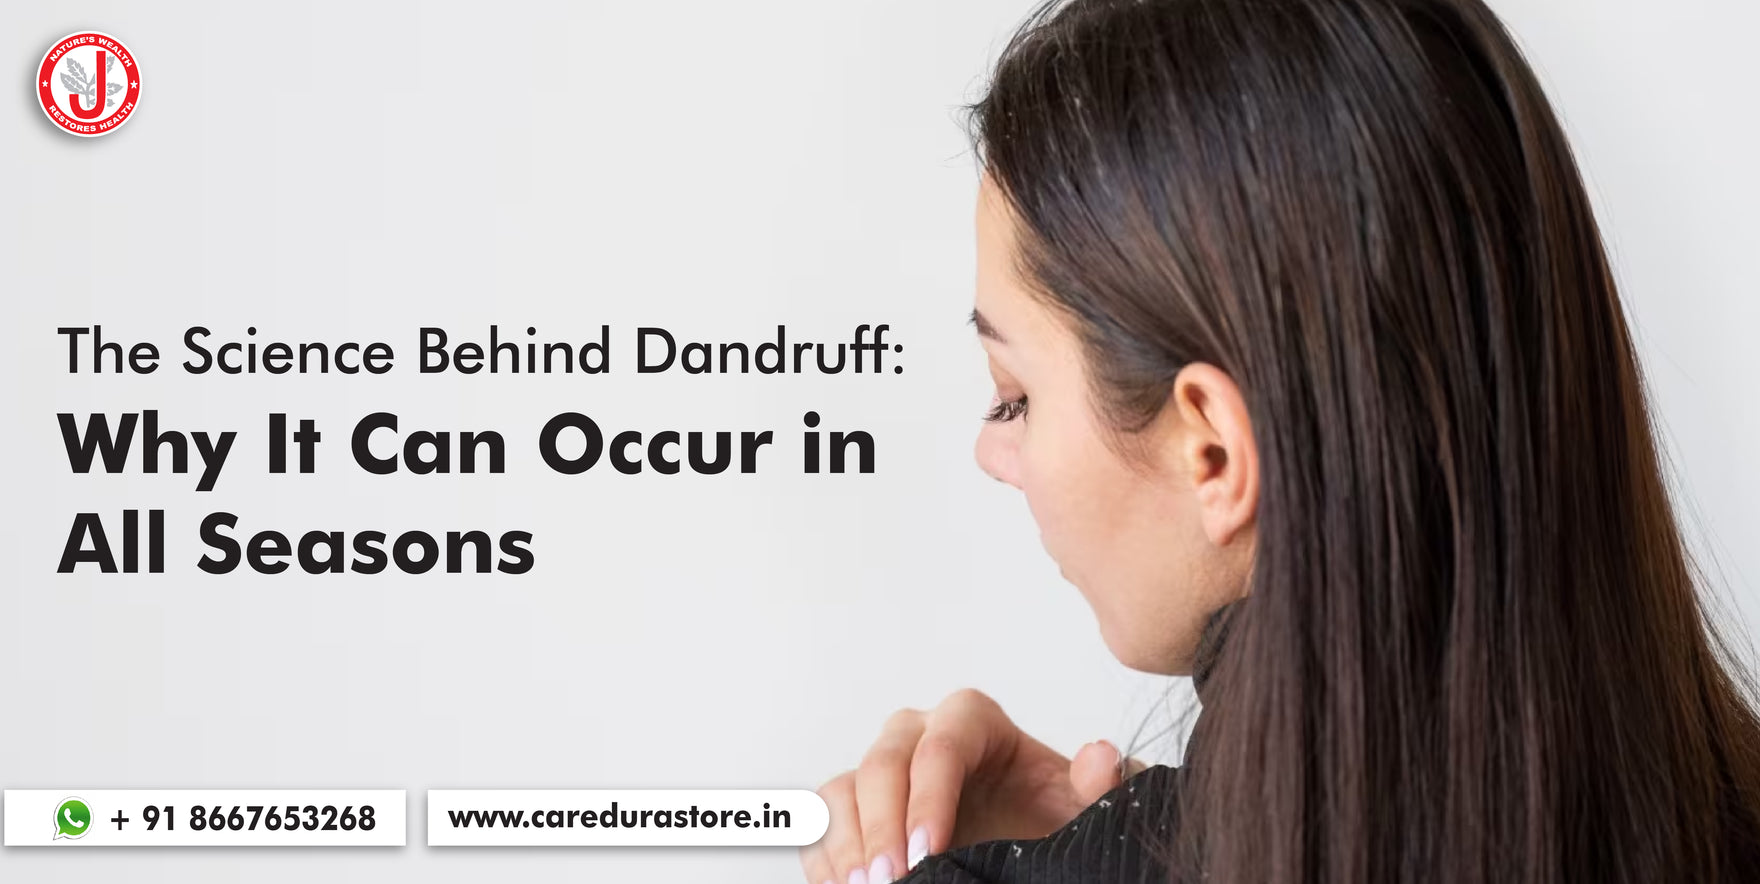 The Science Behind Dandruff: Why It Can Occur in All Seasons